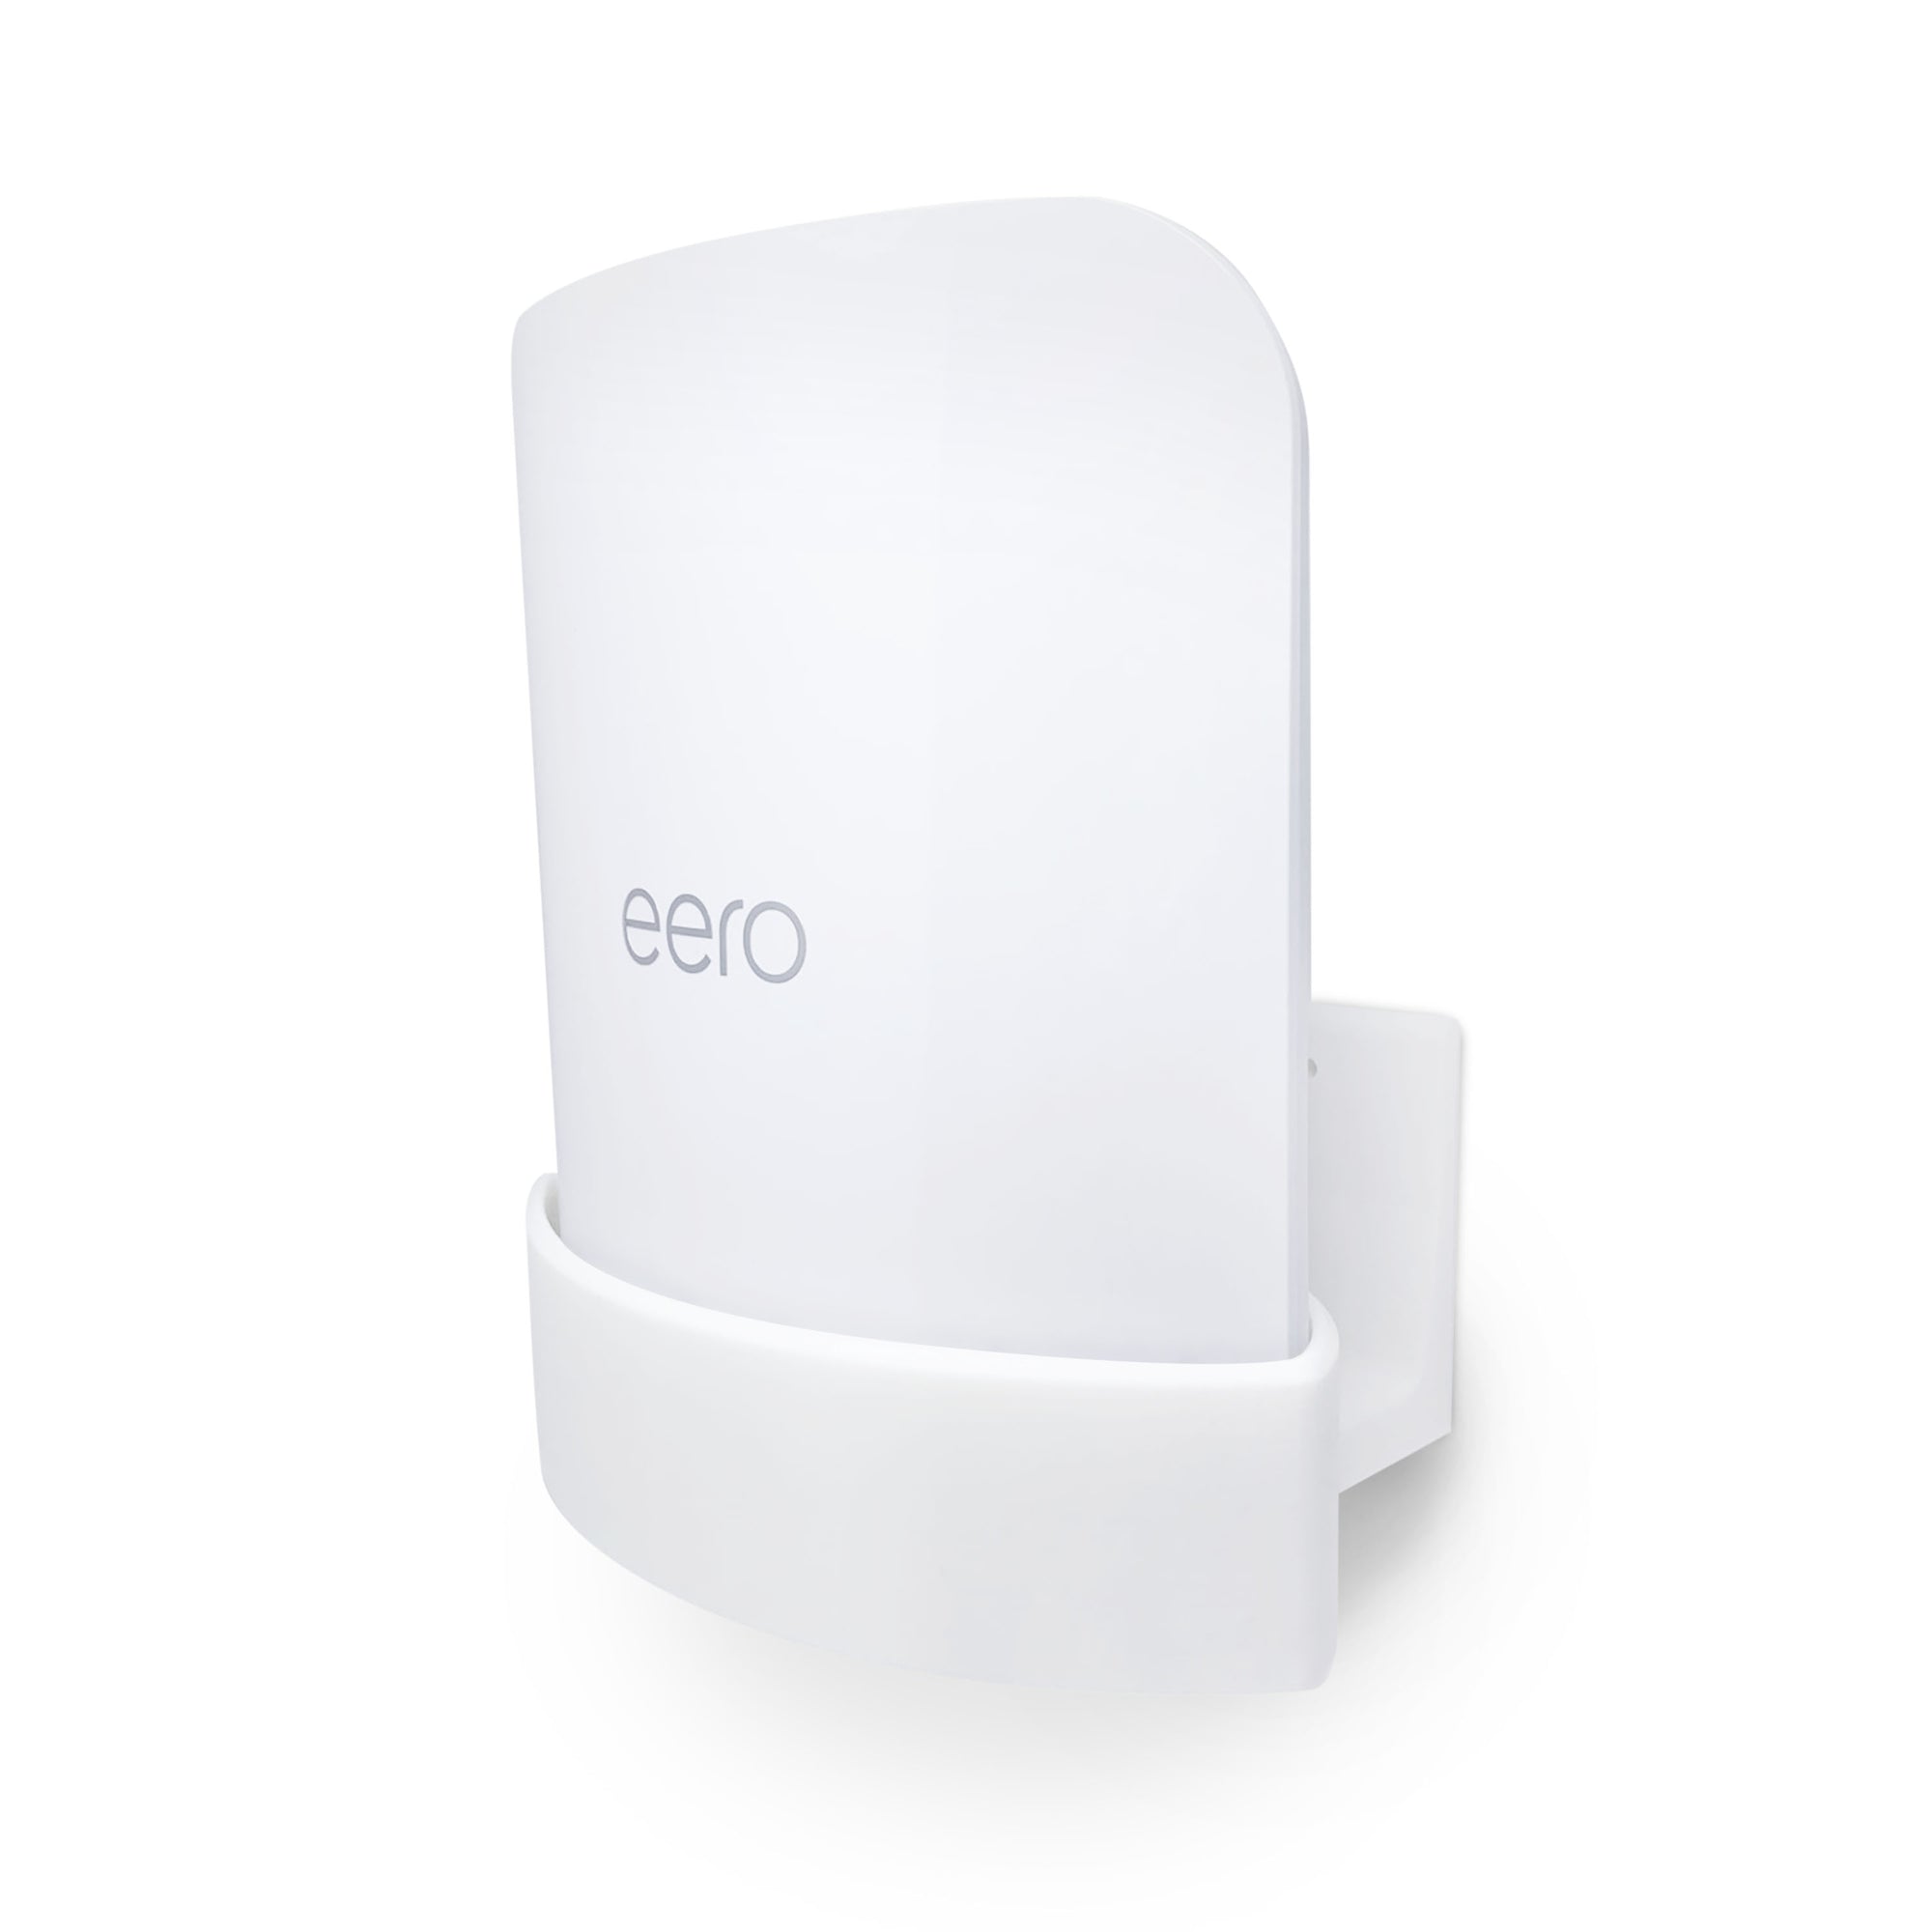 Screwless Wall Mount for EERO Max 7 WiFi Router, Easy To Install Holder, Adhesive & Screw In, Increase Range & Reduce Clutter